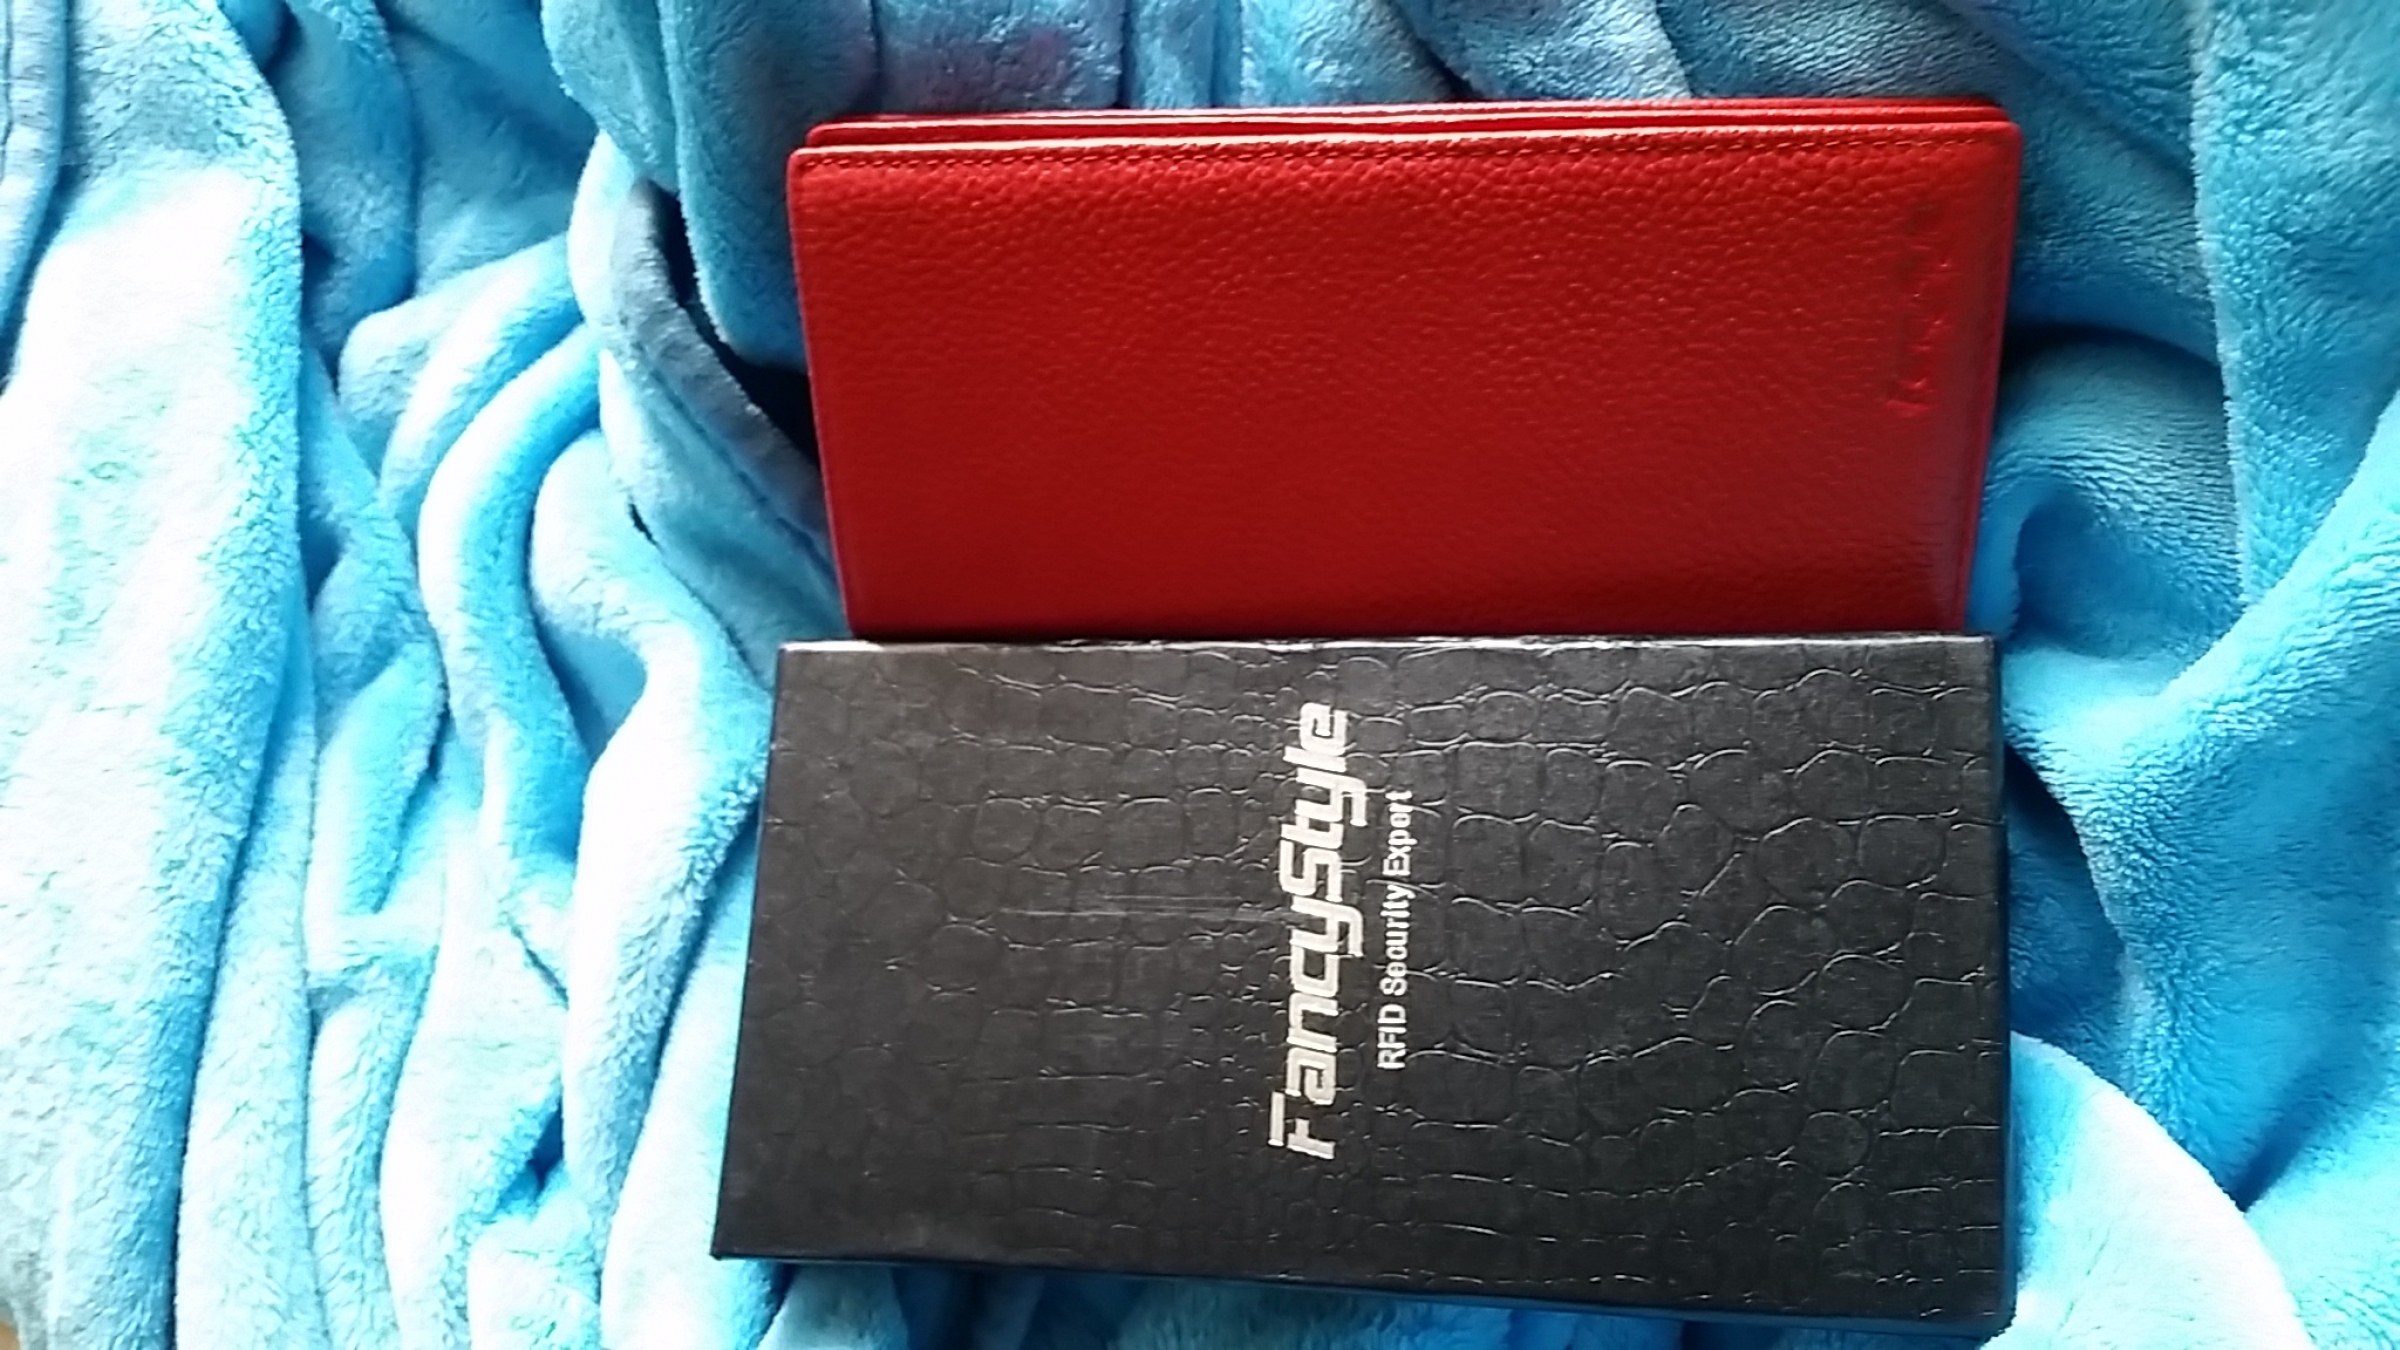 Nice Thin Wallet, holds a decent amount of cards